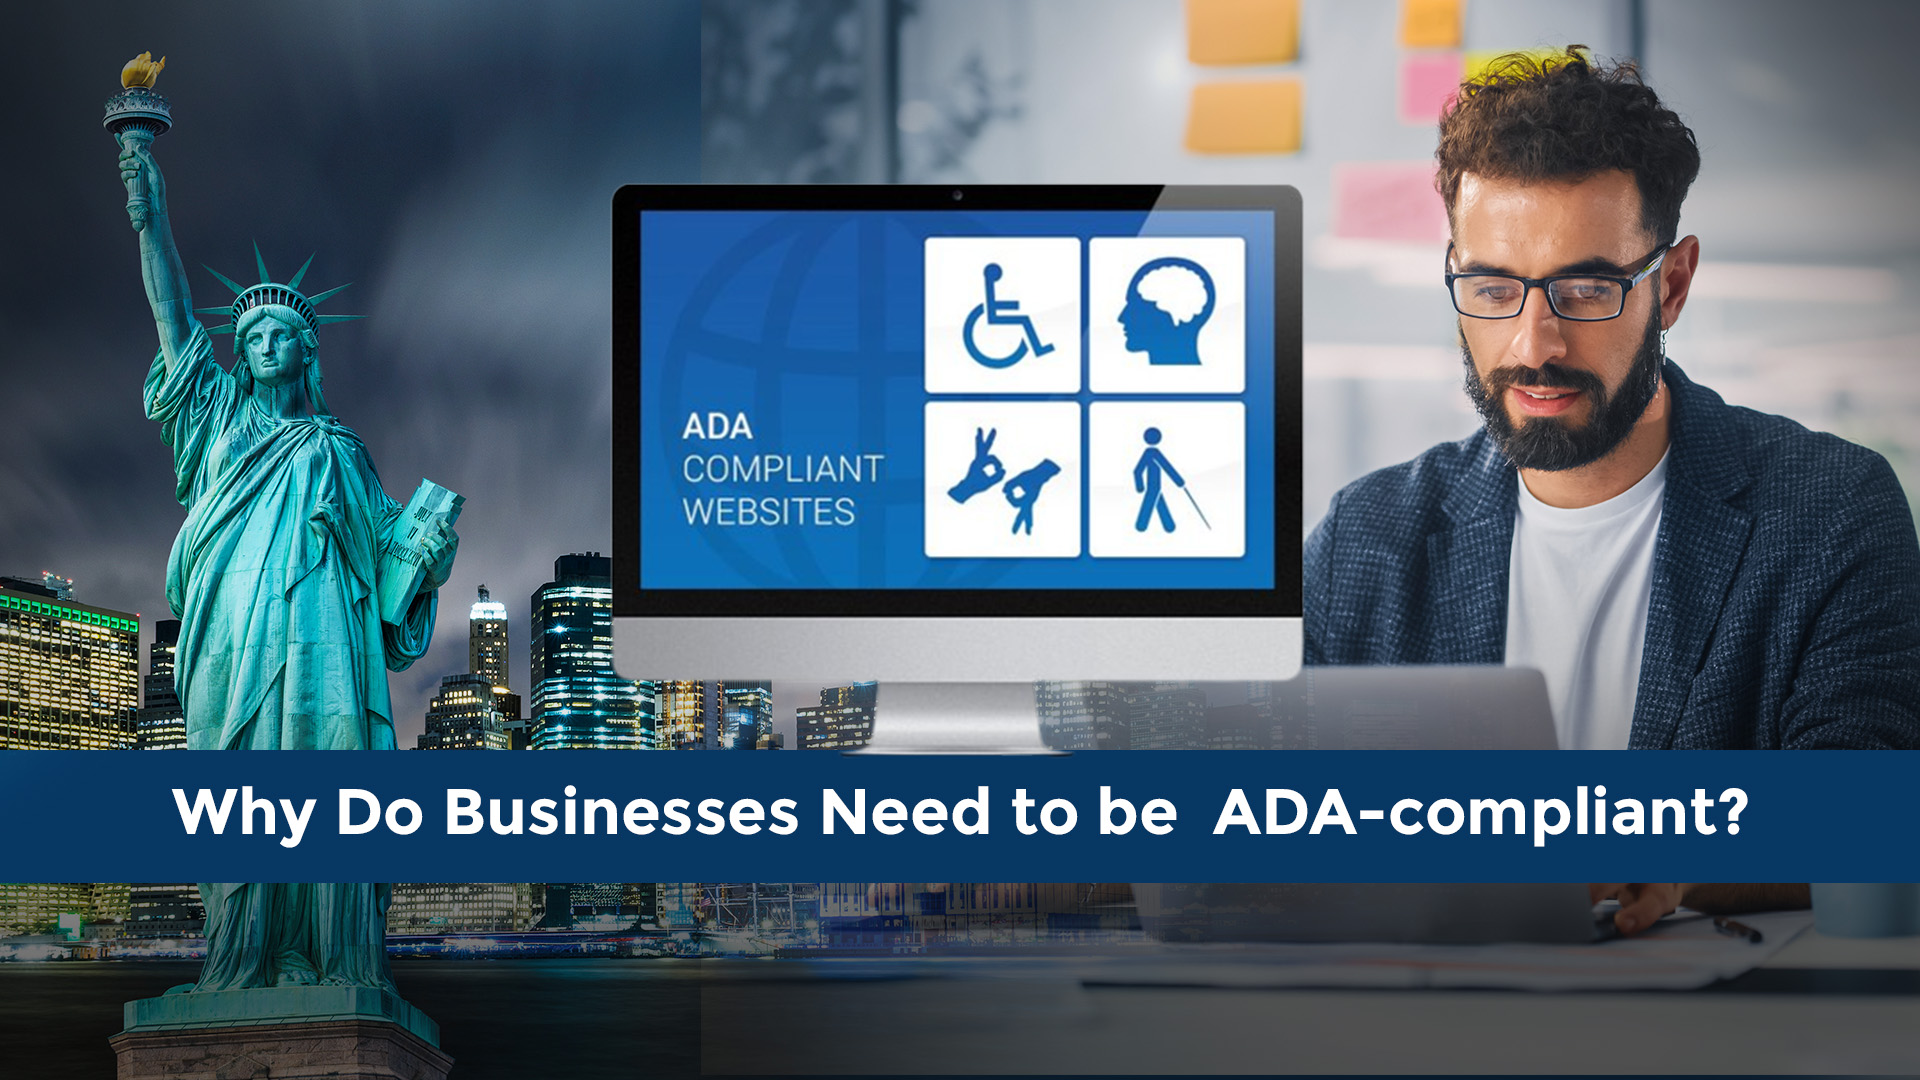 Is Your Website ADA-Compliant? Don't risk the consequences - learn why ADA compliance Matters!